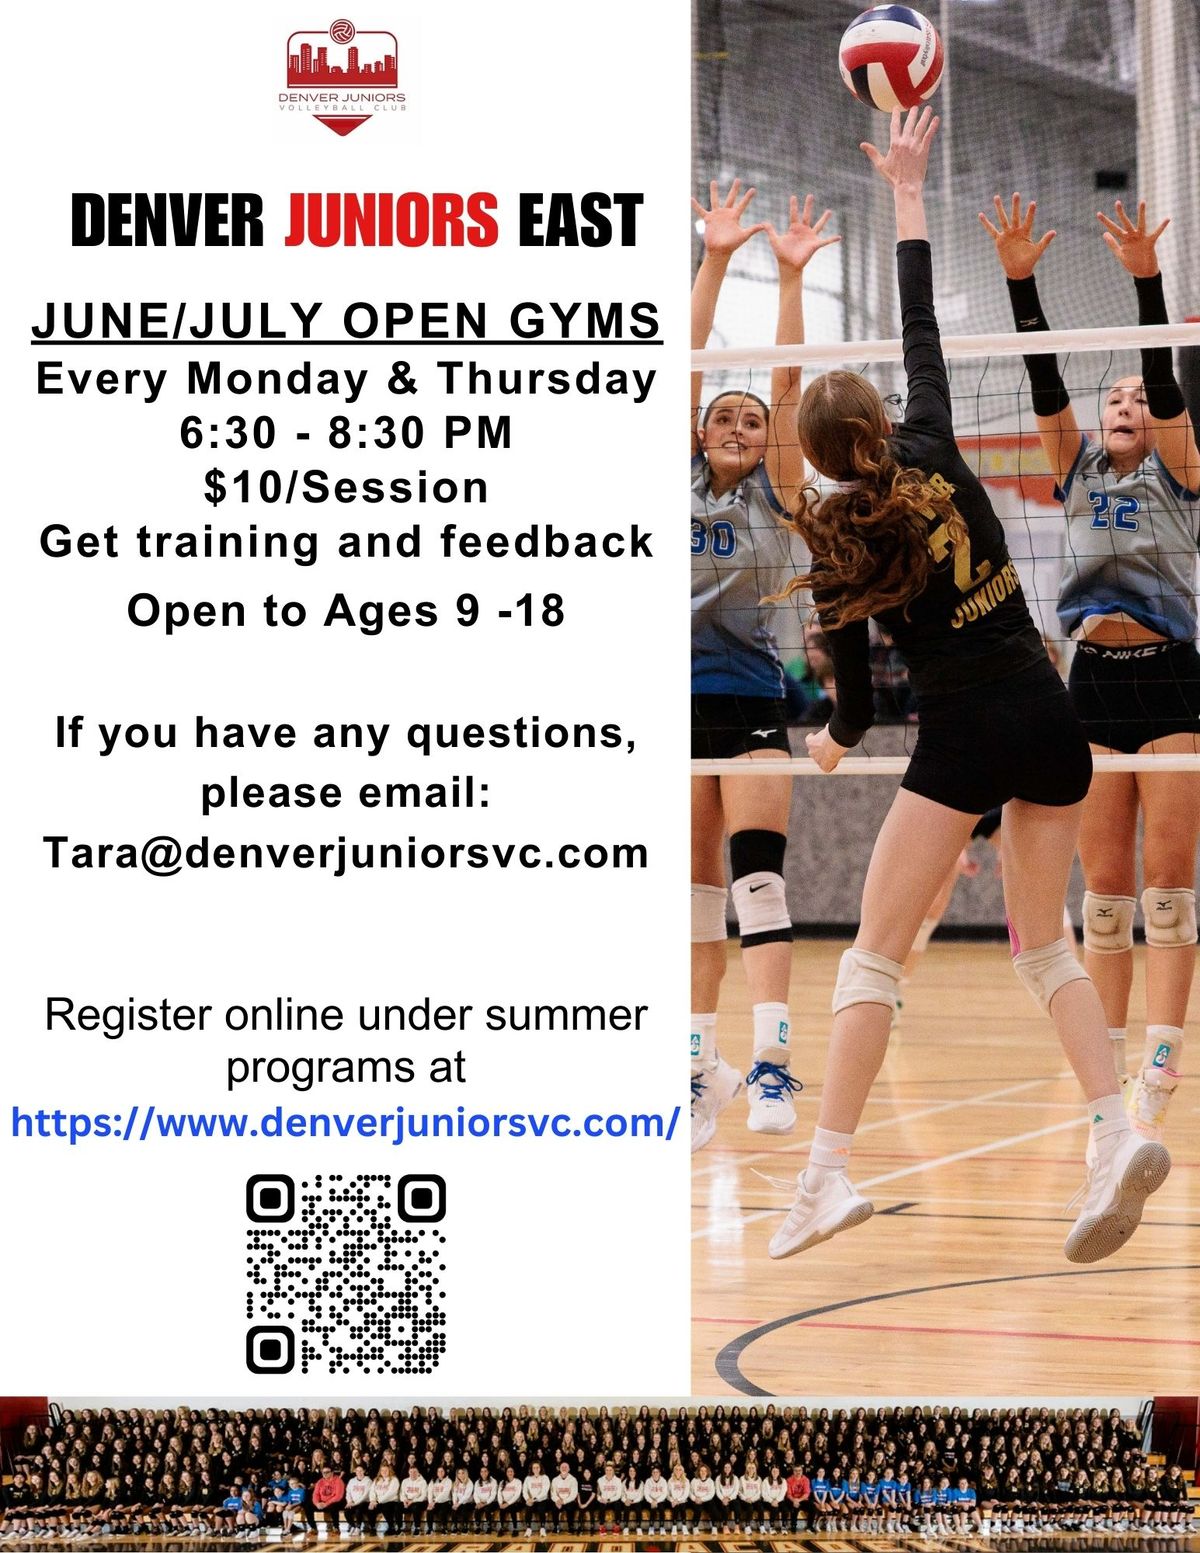 Join the 300 girls Denver Junior Volleyball Club